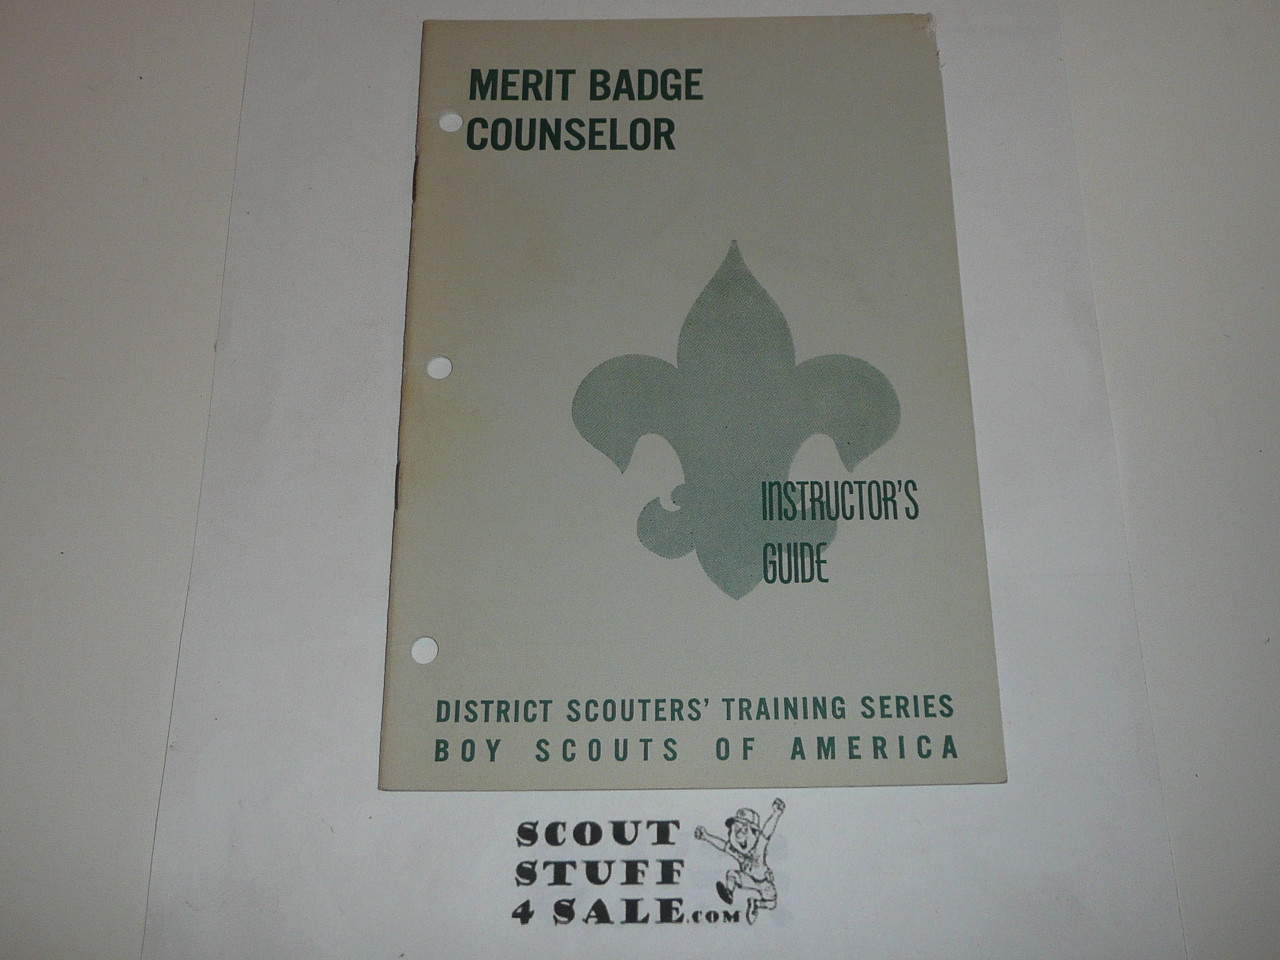 District Scouter's Training Series, Merit Badge Counselor Instructor's Guide, 7-62 printing